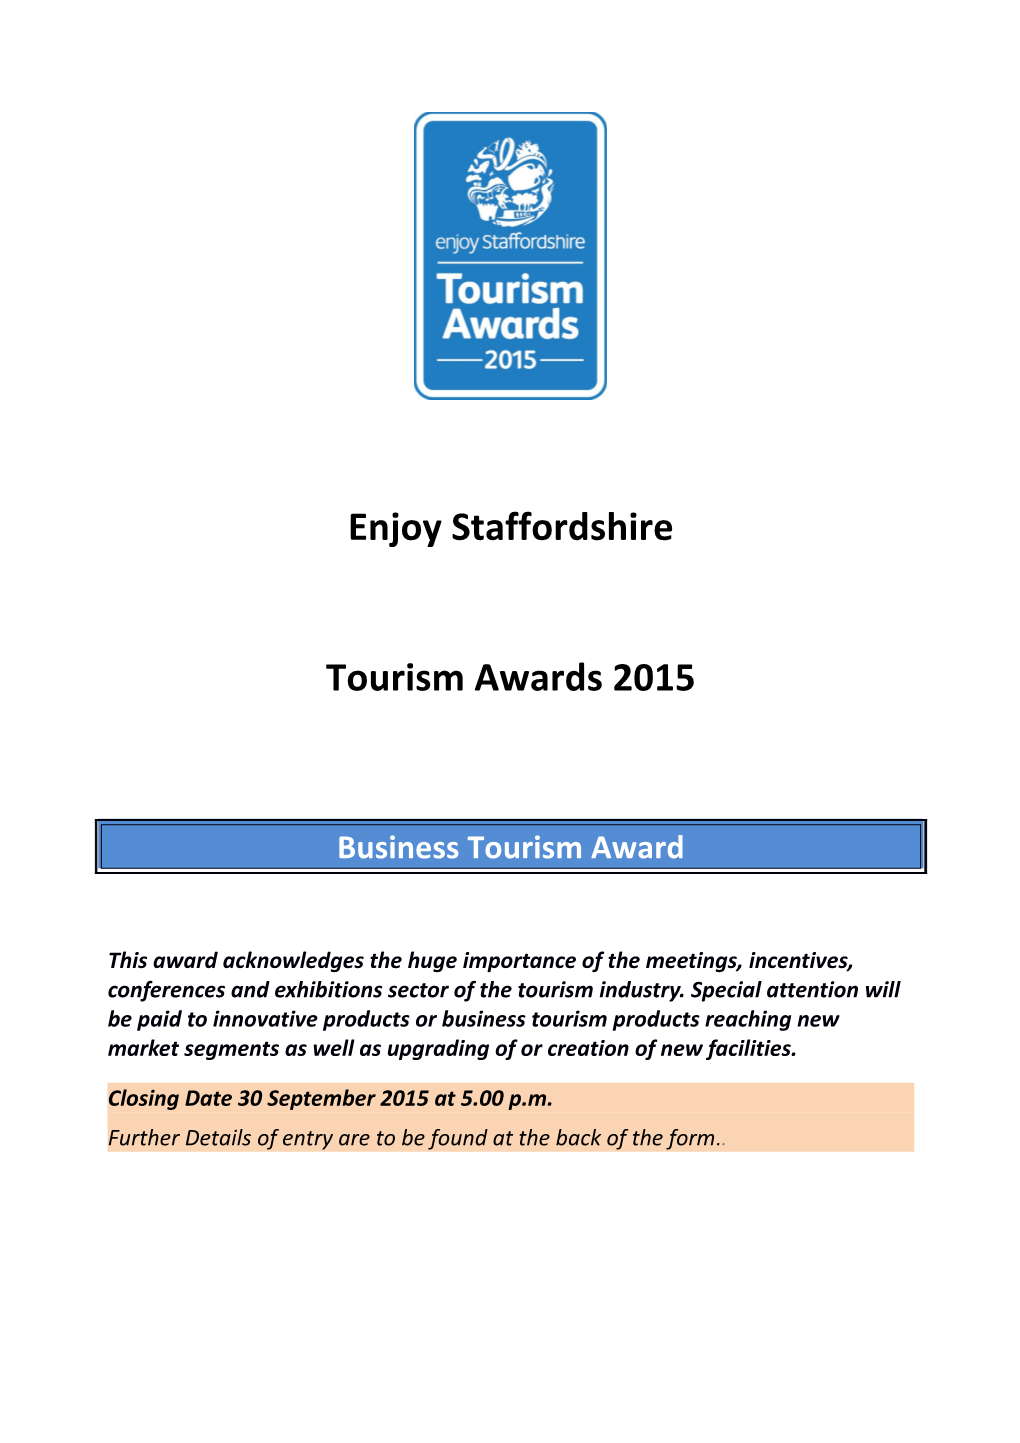 Business Tourism Award of the Year